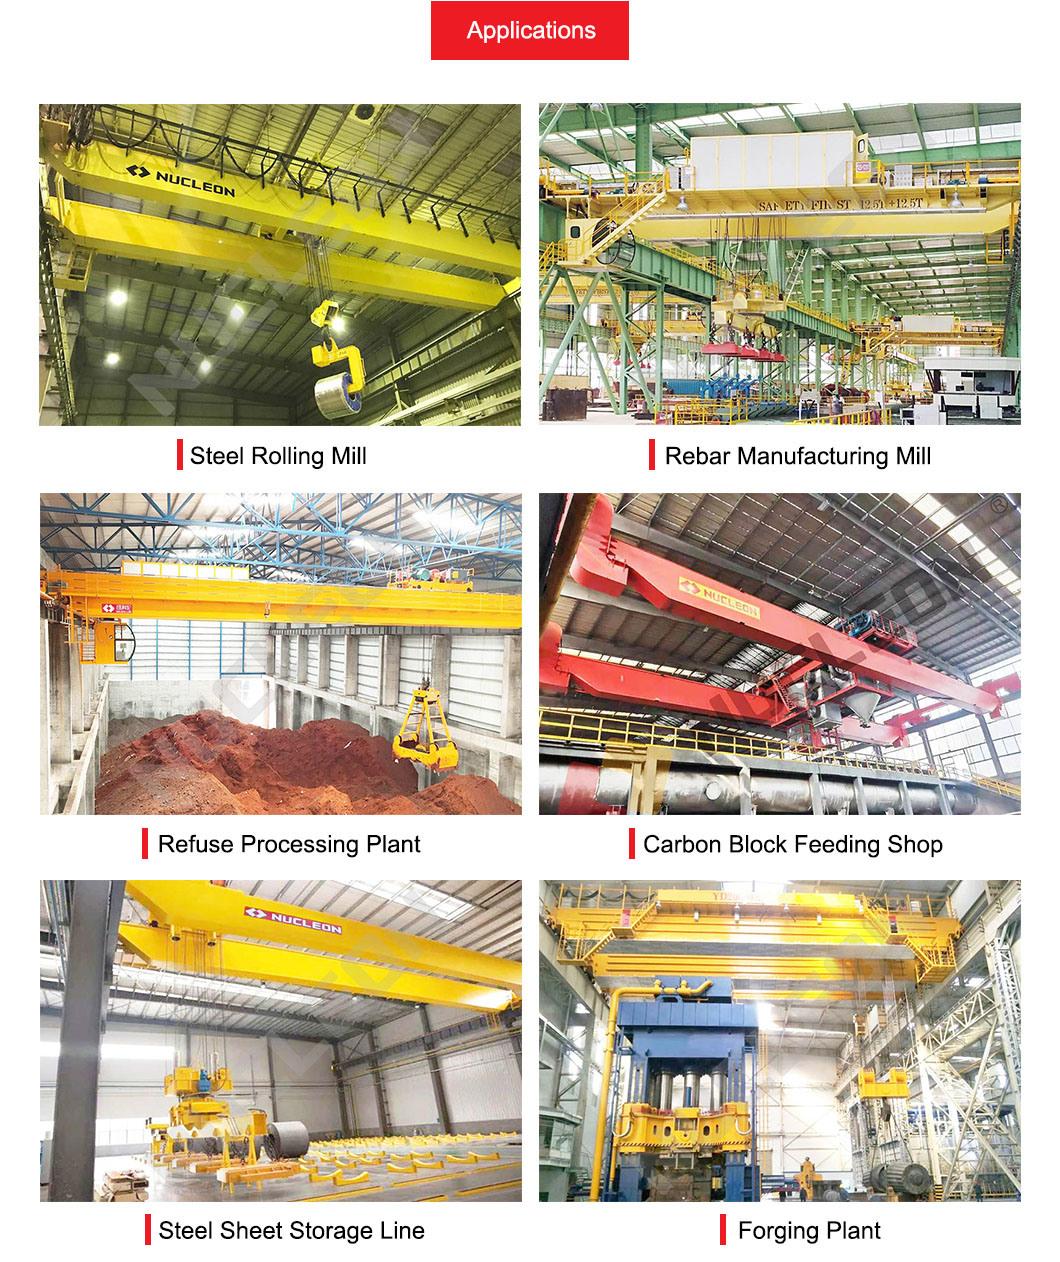 Nucleon Steel Rolling Mill Use Double Girder Electric Overhead Traveling Crane